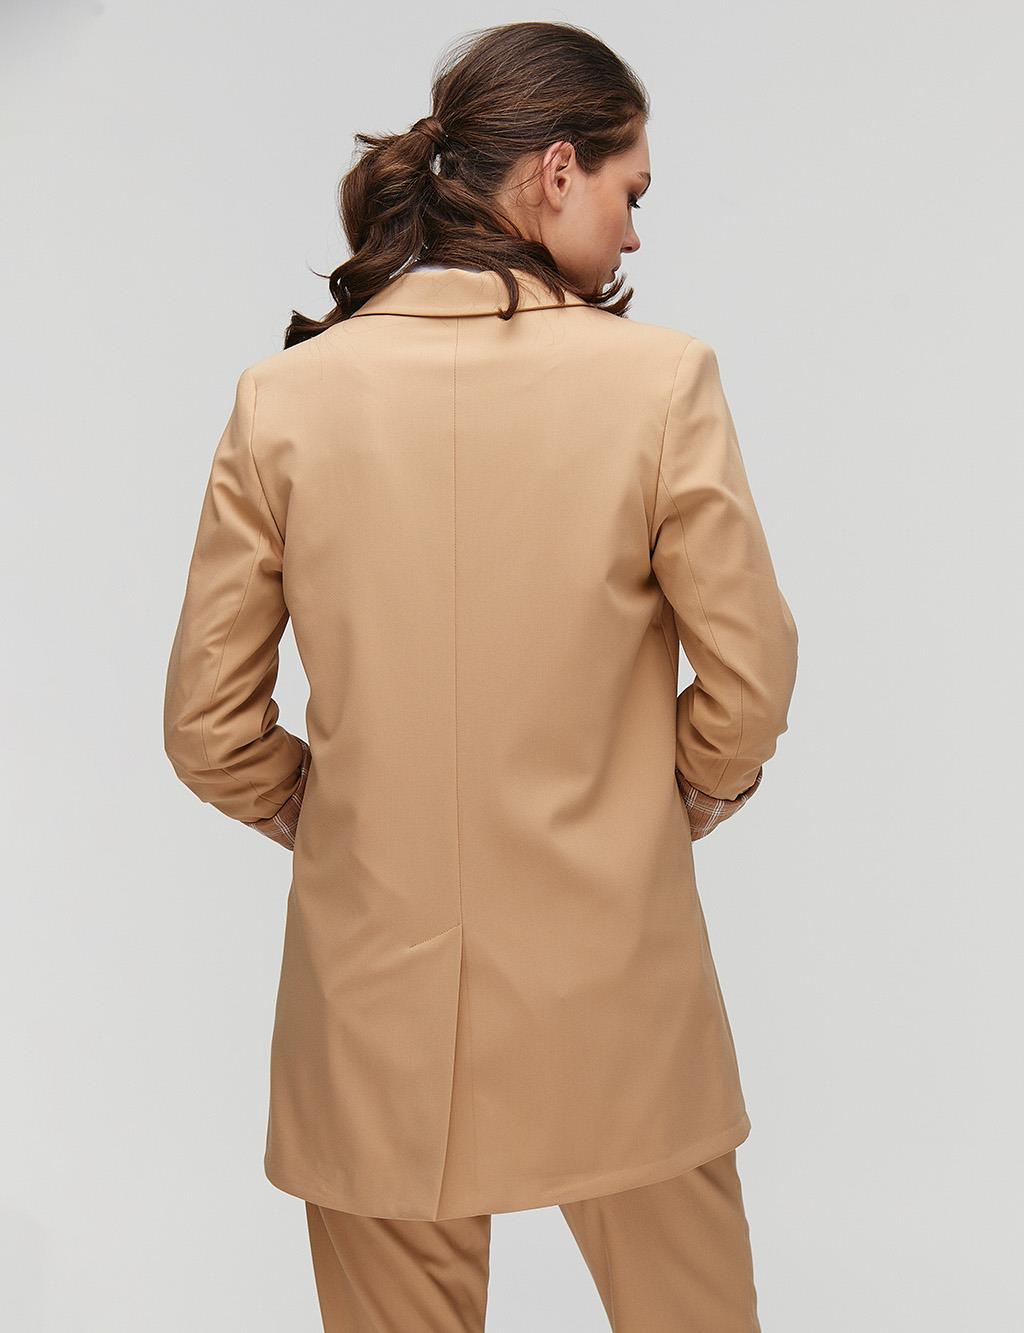 Collapsible Double Breasted Jacket Beige